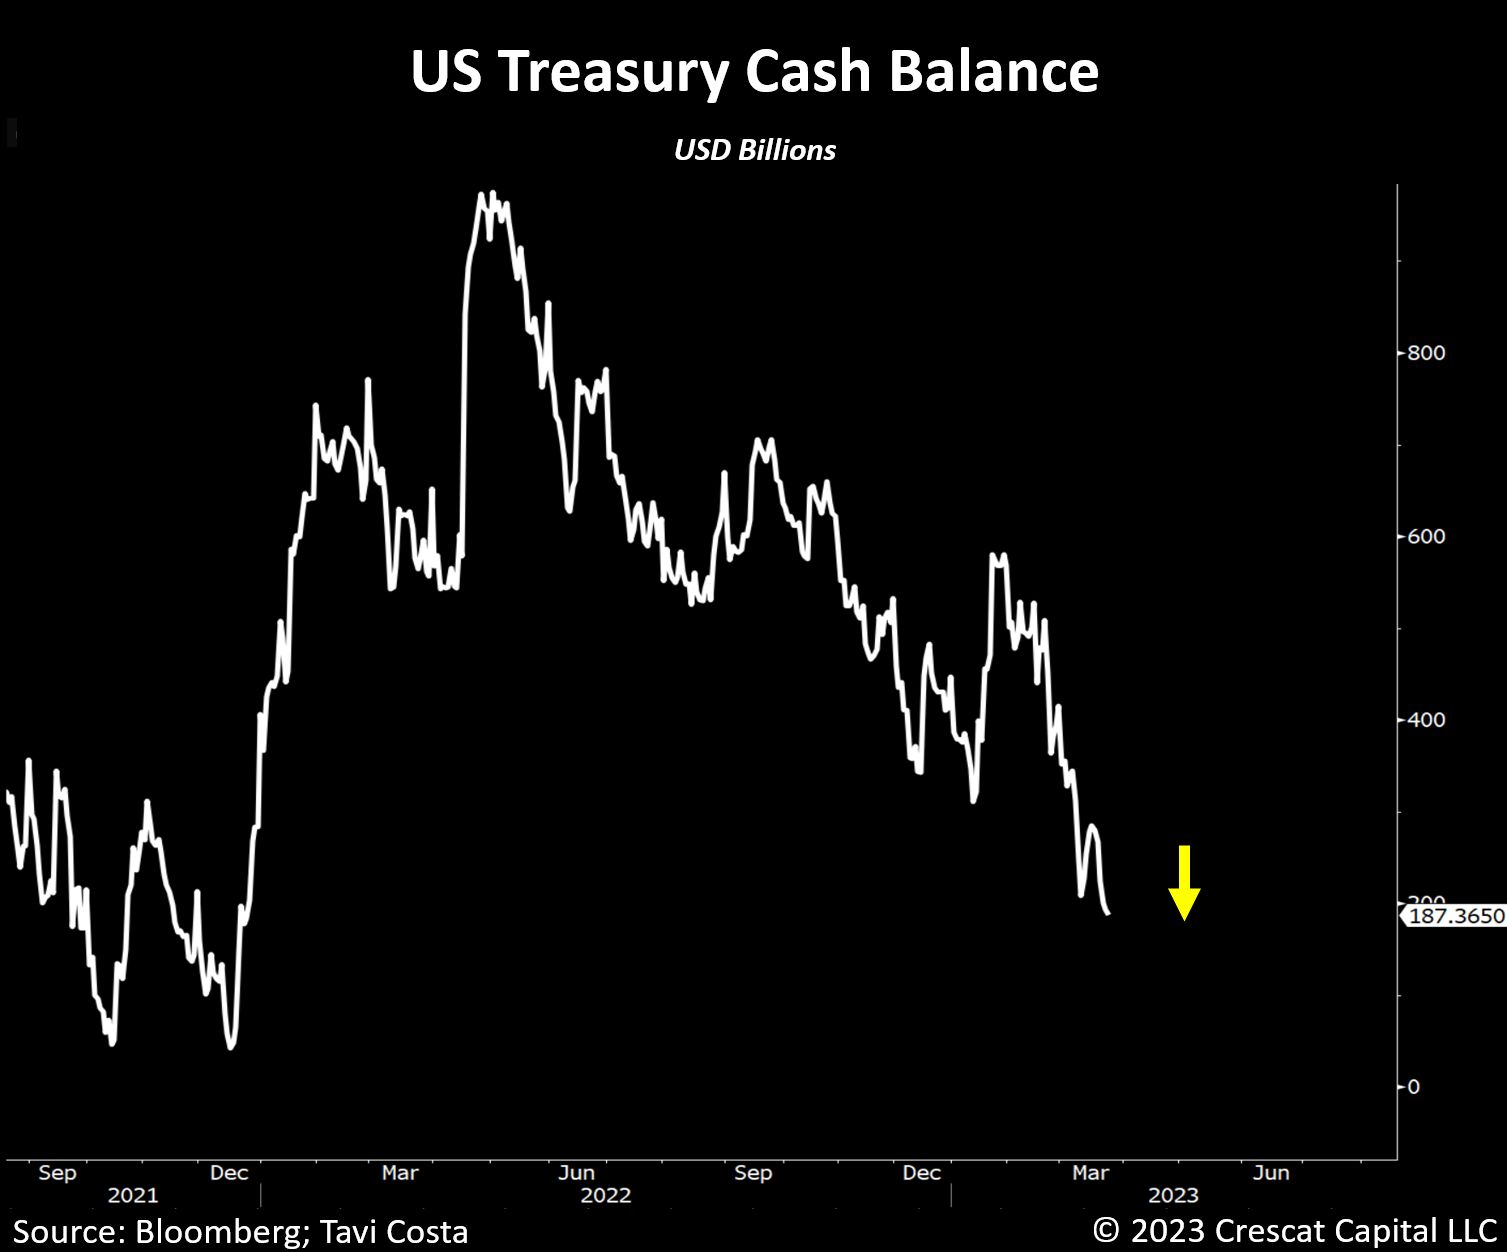 The US Treasury cash balance just reached another recent low